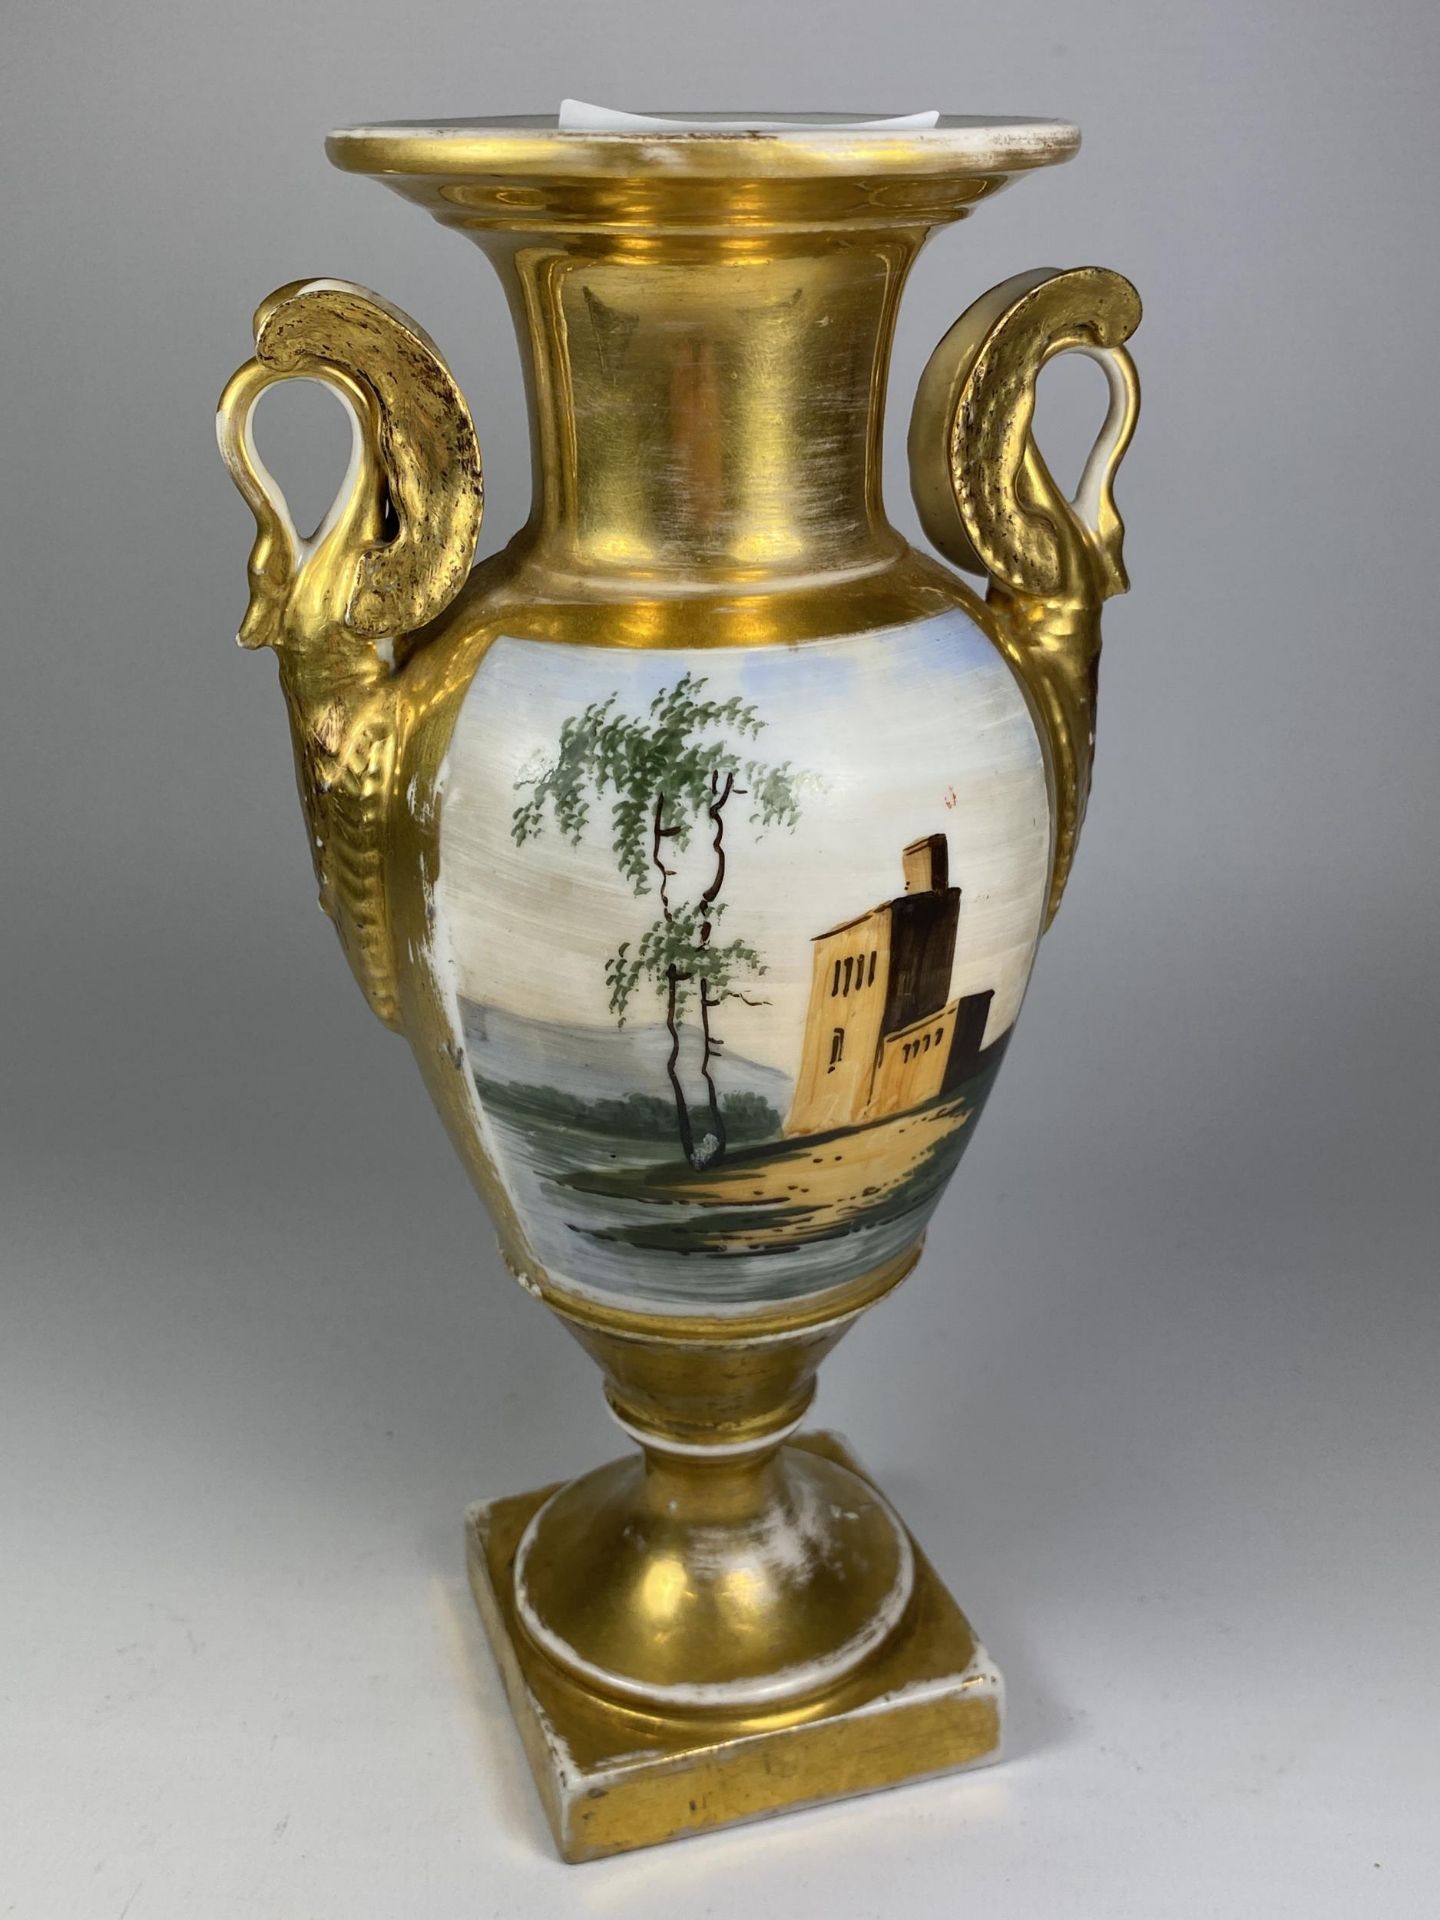 A PARIS FRENCH STYLE PORCELAIN GILT TWIN HANDLED VASE - Image 2 of 3